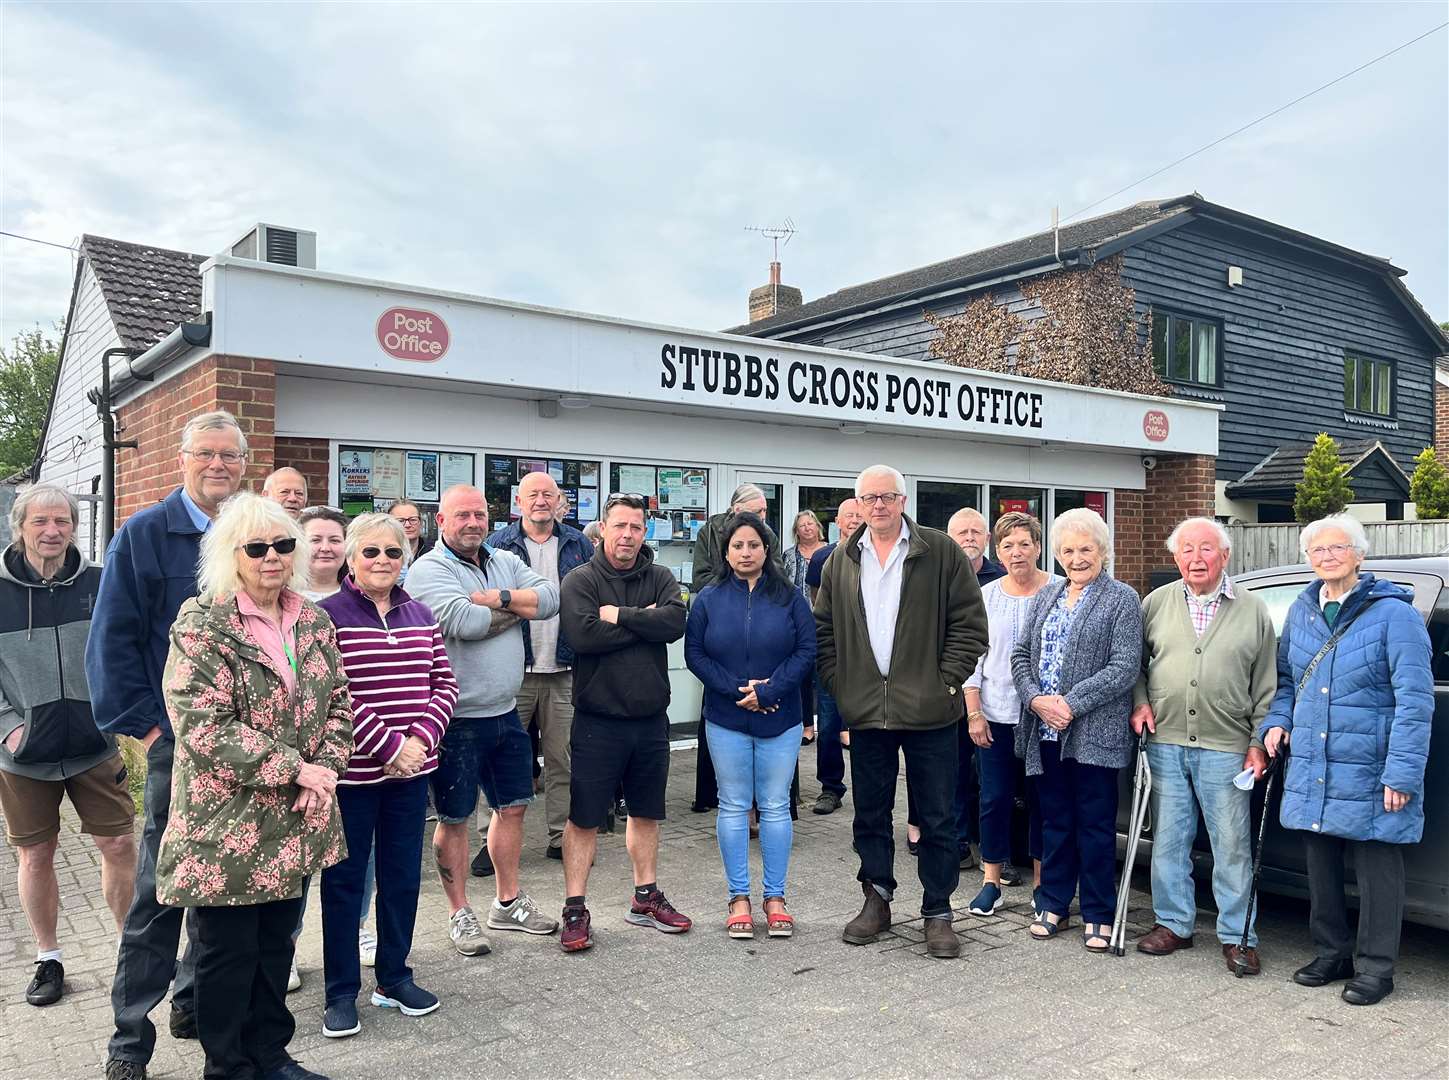 Residents and business owners in Shadoxhurst are against plans for a new wastewater management site to be built opposite their homes